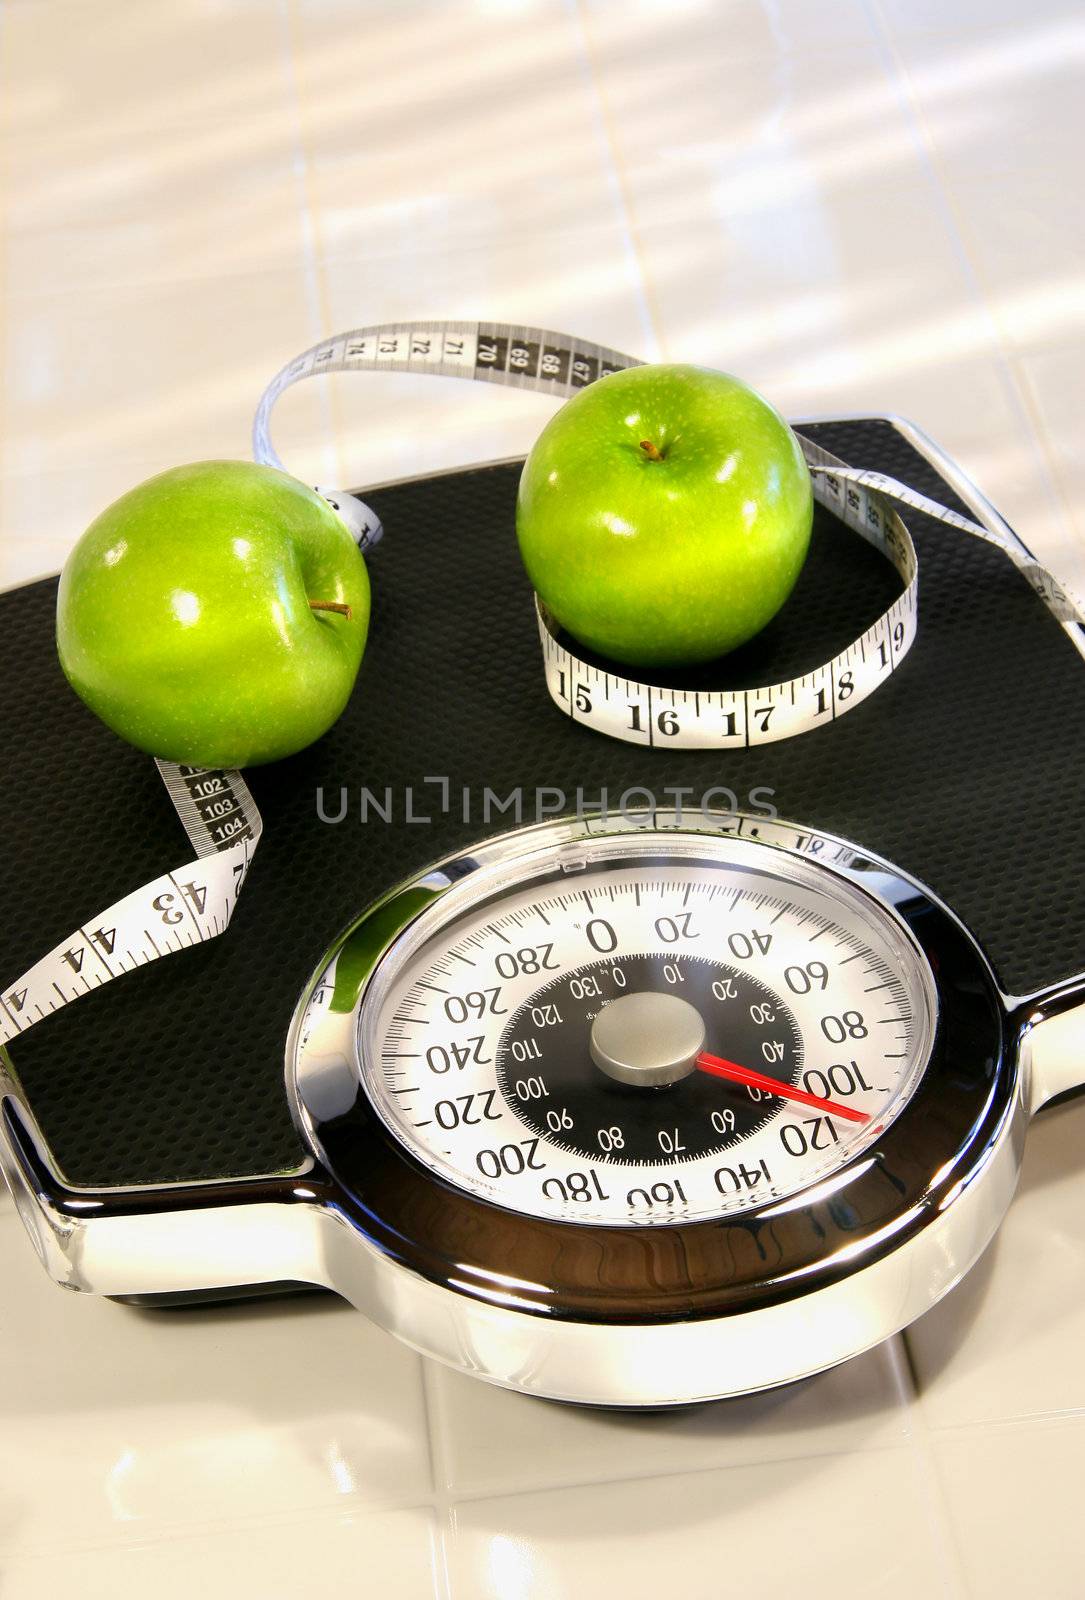 Weight scale with green apples on white tile floor